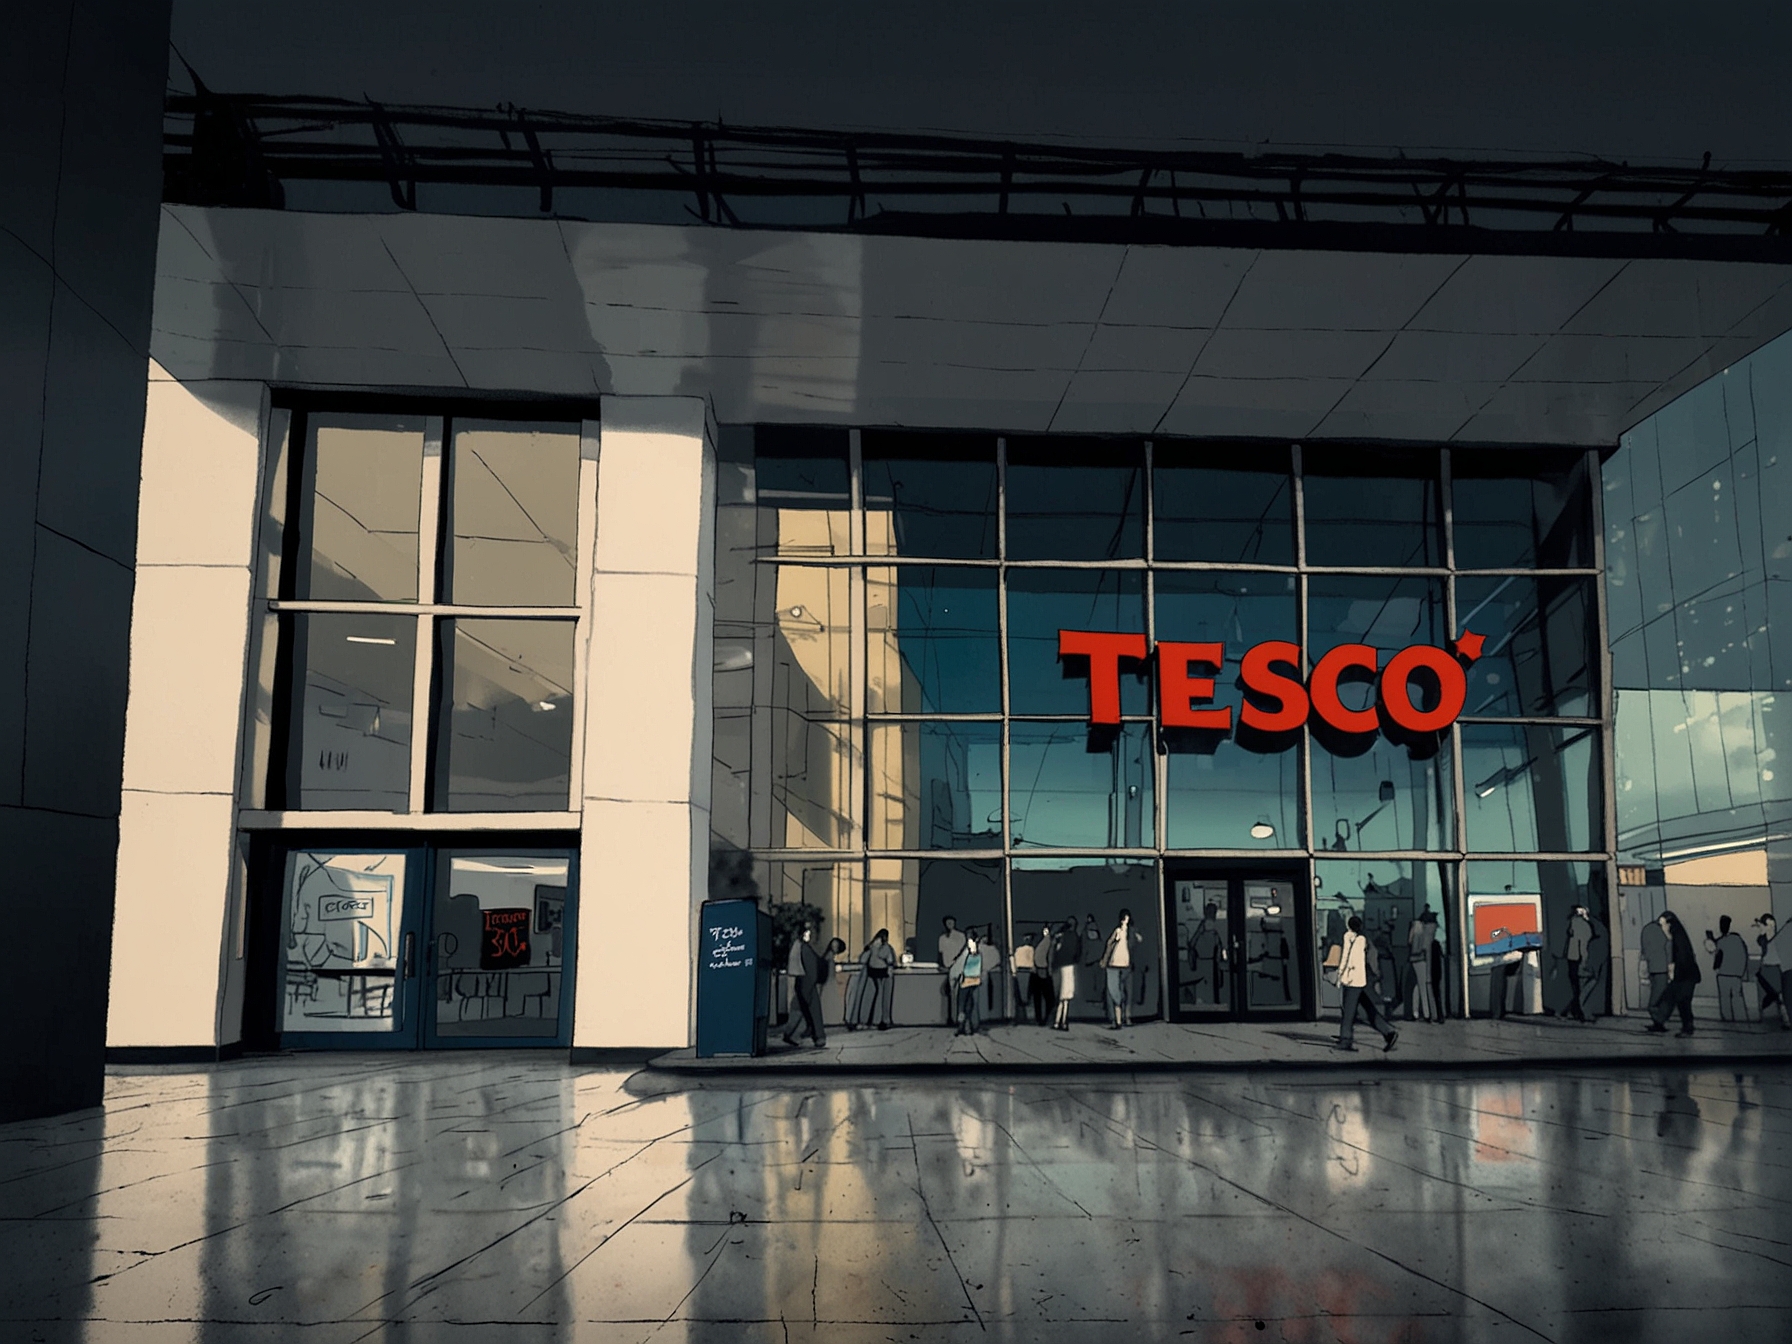 A bullish stock chart showing Tesco's 50% growth over the past year, reflecting its successful digital transformation and strategic initiatives in the retail market.